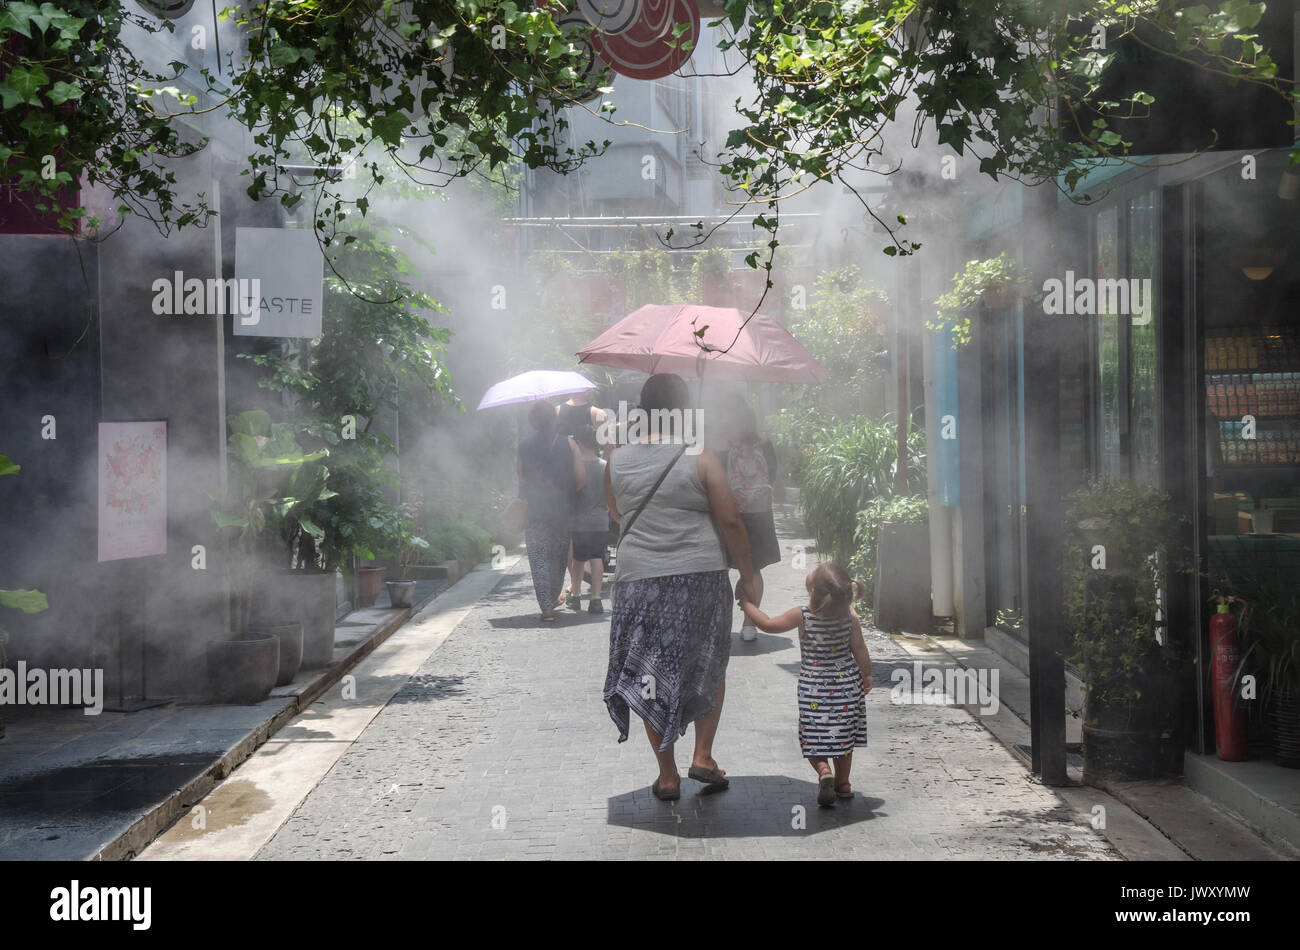 A mother and child walk around the streets of Tianzifang in Shanghai, China. Mist is sprayed from a cooling system to bring relief form the hot sun. Stock Photo